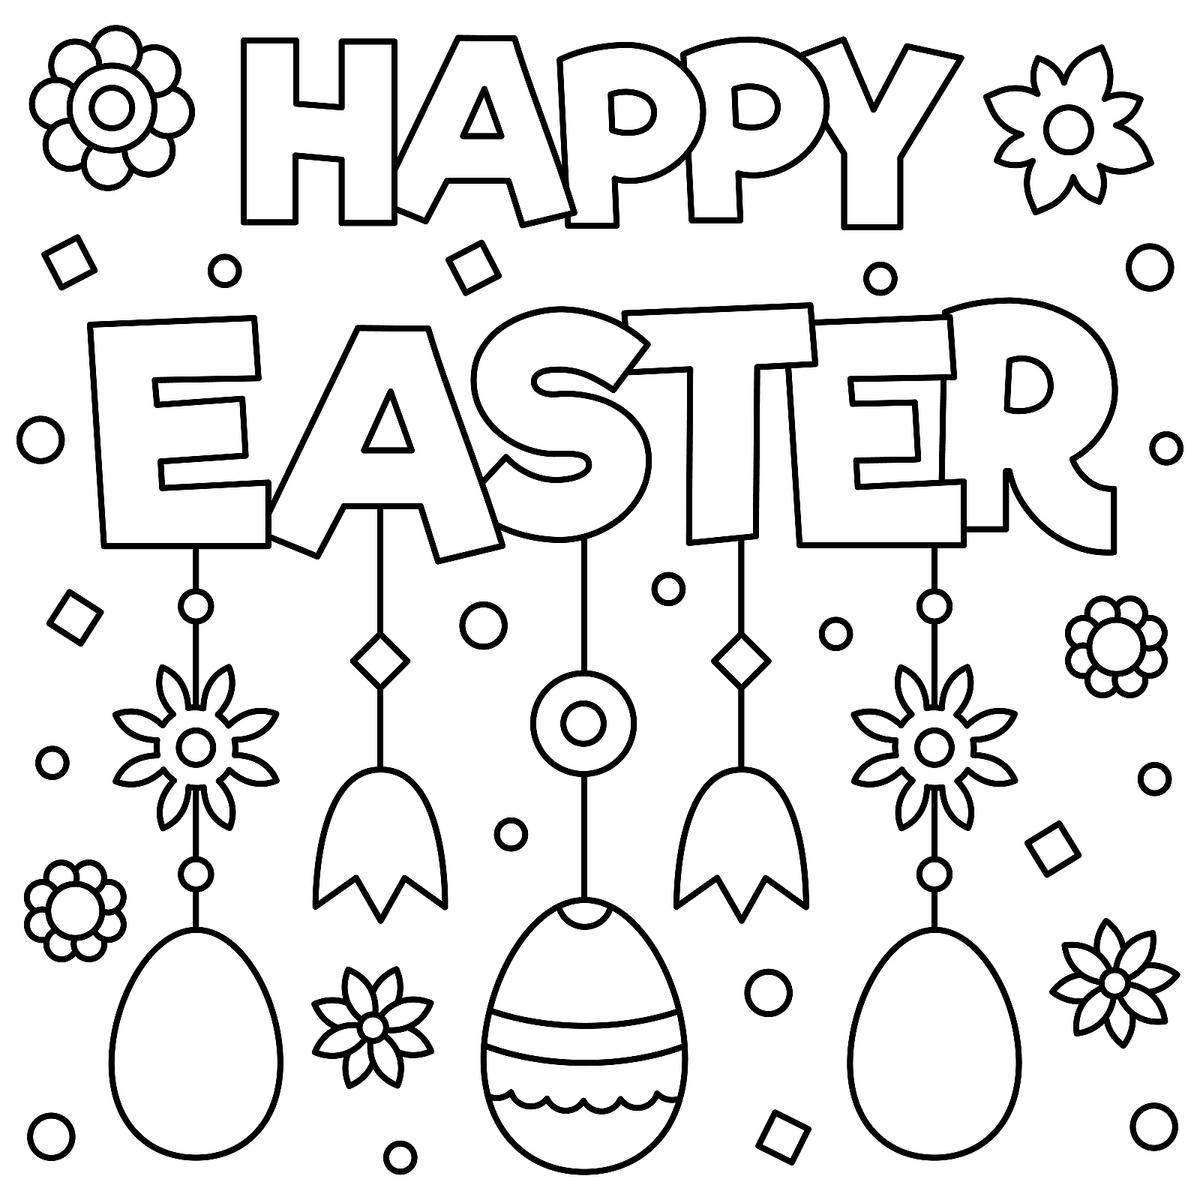 Easter Coloring Page: Fun Spring Themed Printables For The Family